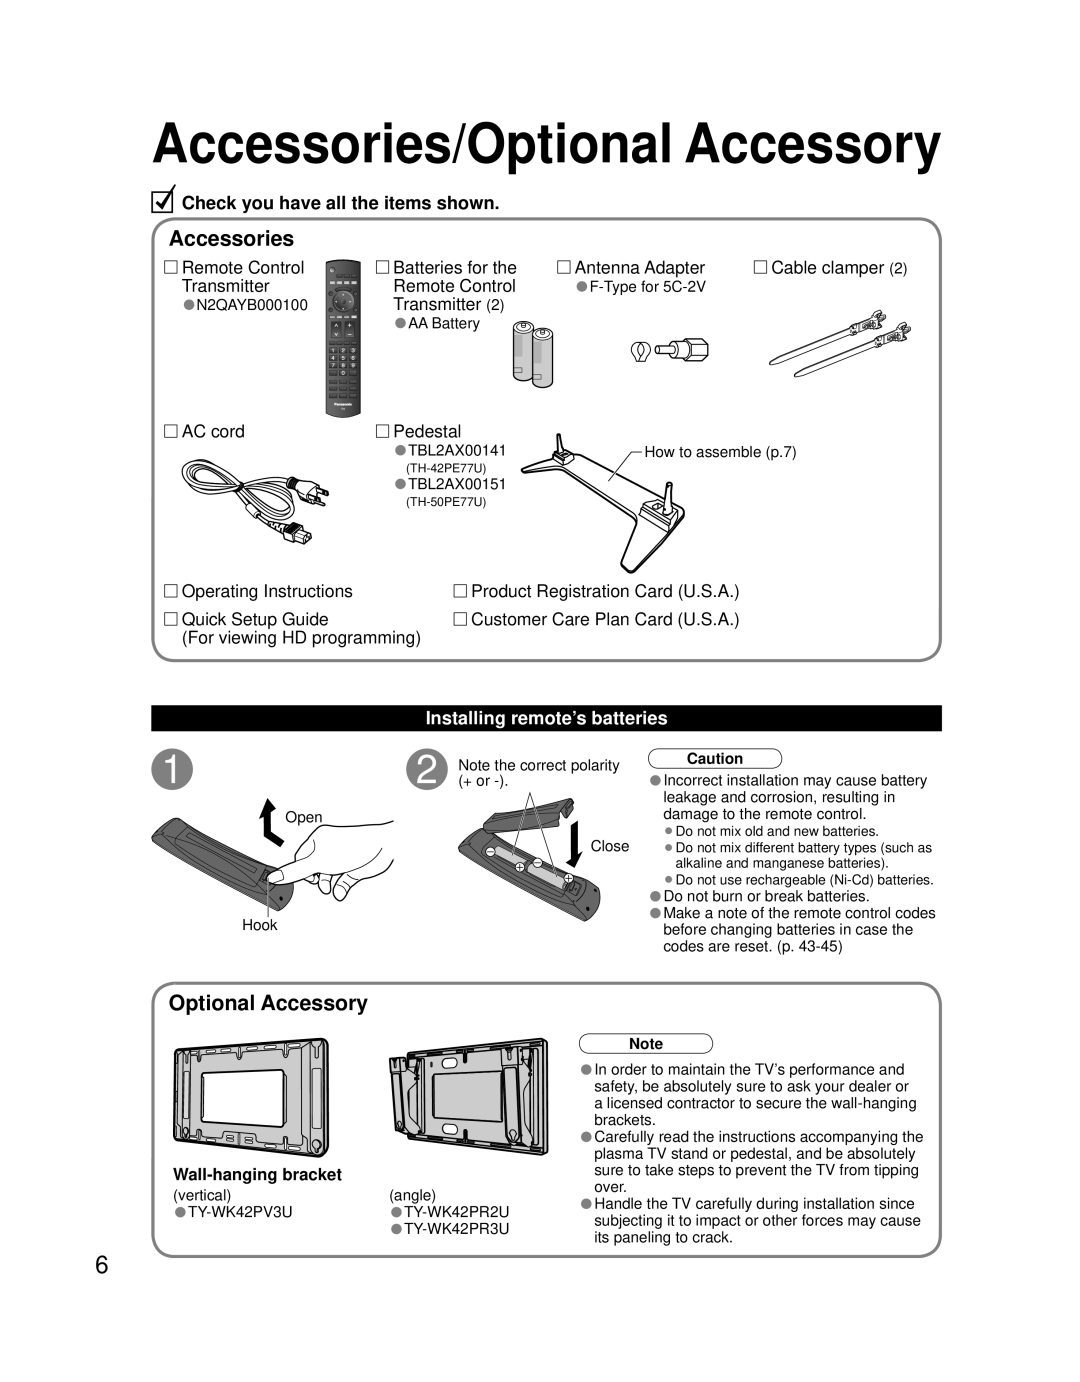 Panasonic TQB2AA0756 Accessories/Optional Accessory, Check you have all the items shown, Installing remote’s batteries 